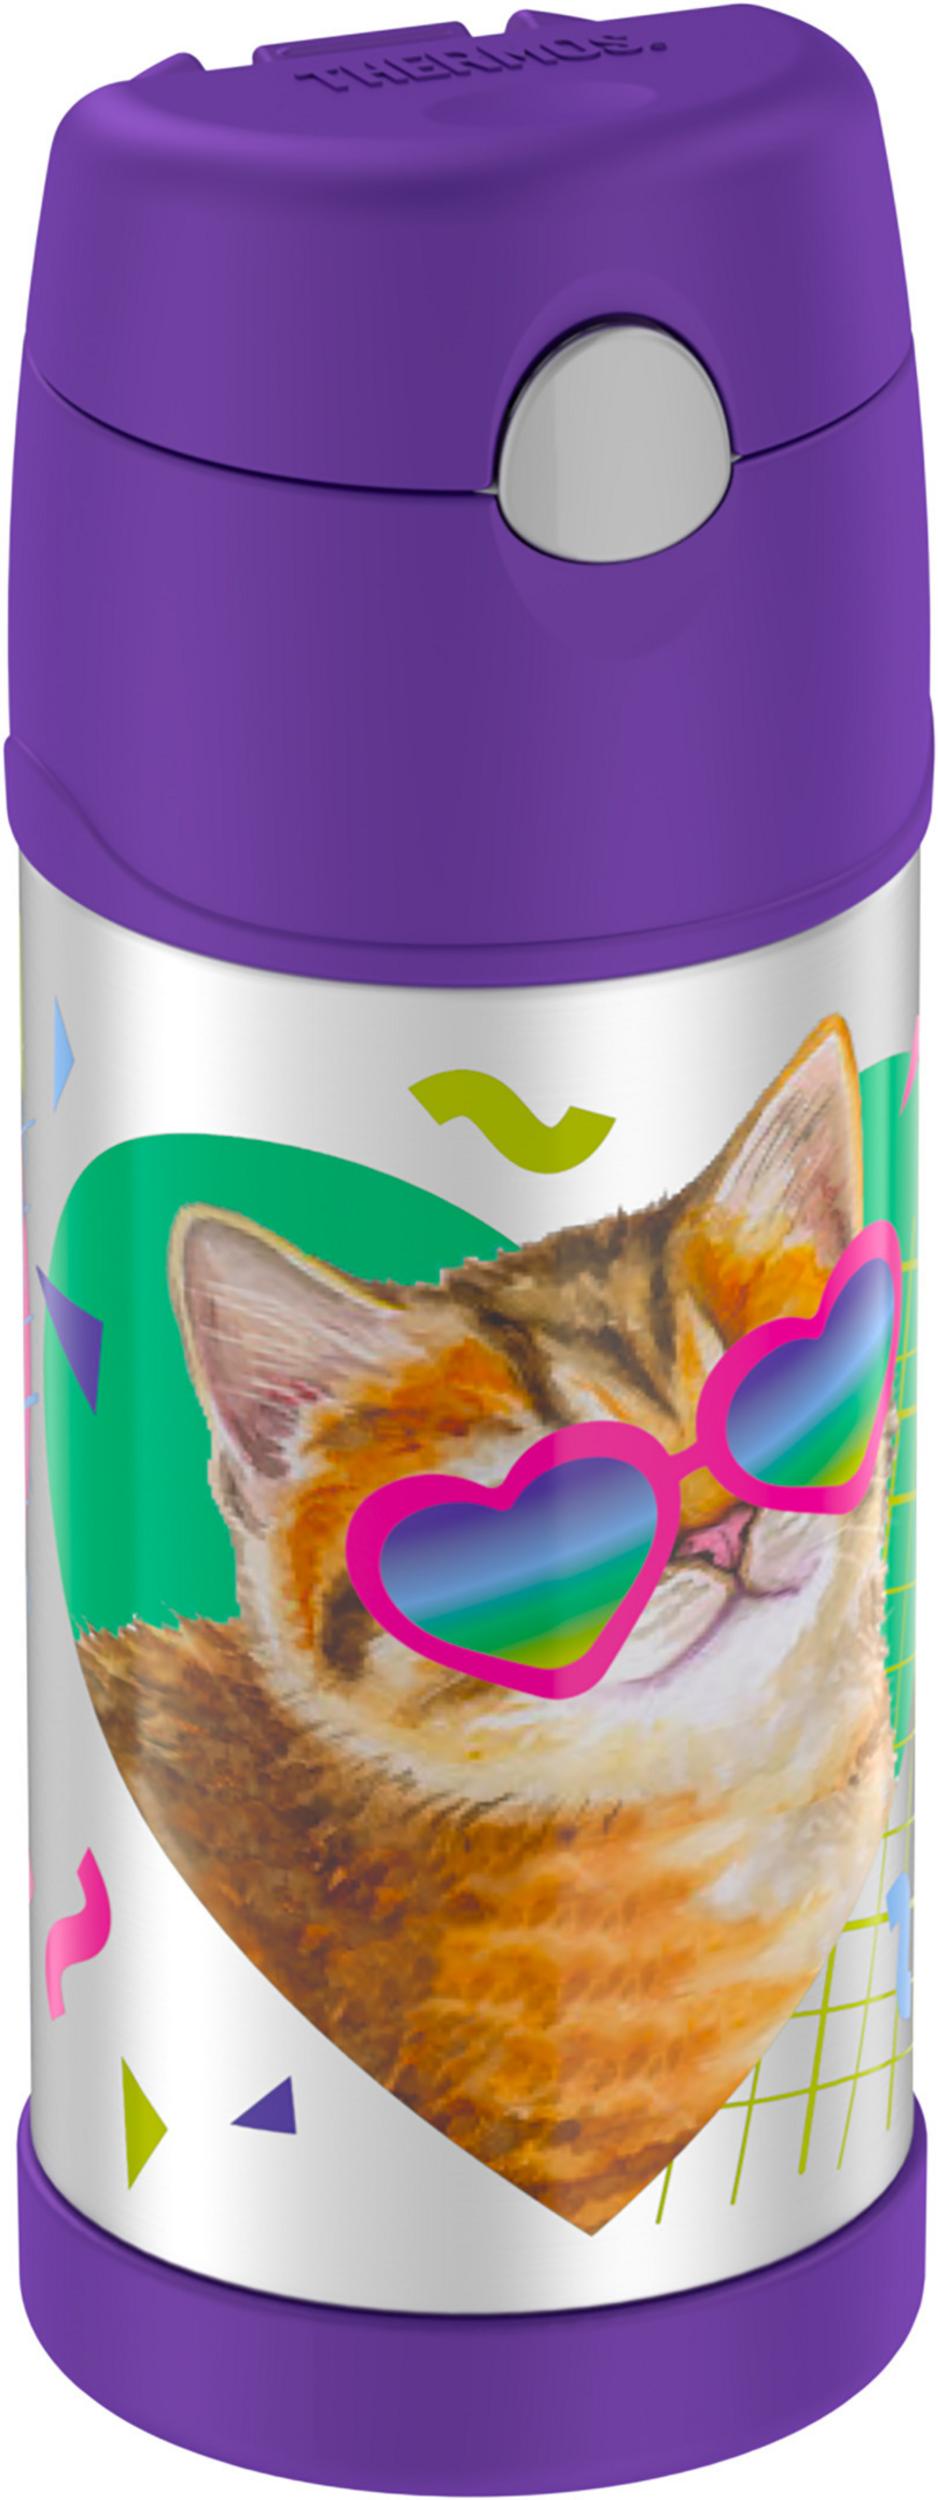 Thermos 12 Oz Funtainer Vacuum Insulated Stainless Steel Straw Bottle Cat - image 4 of 5